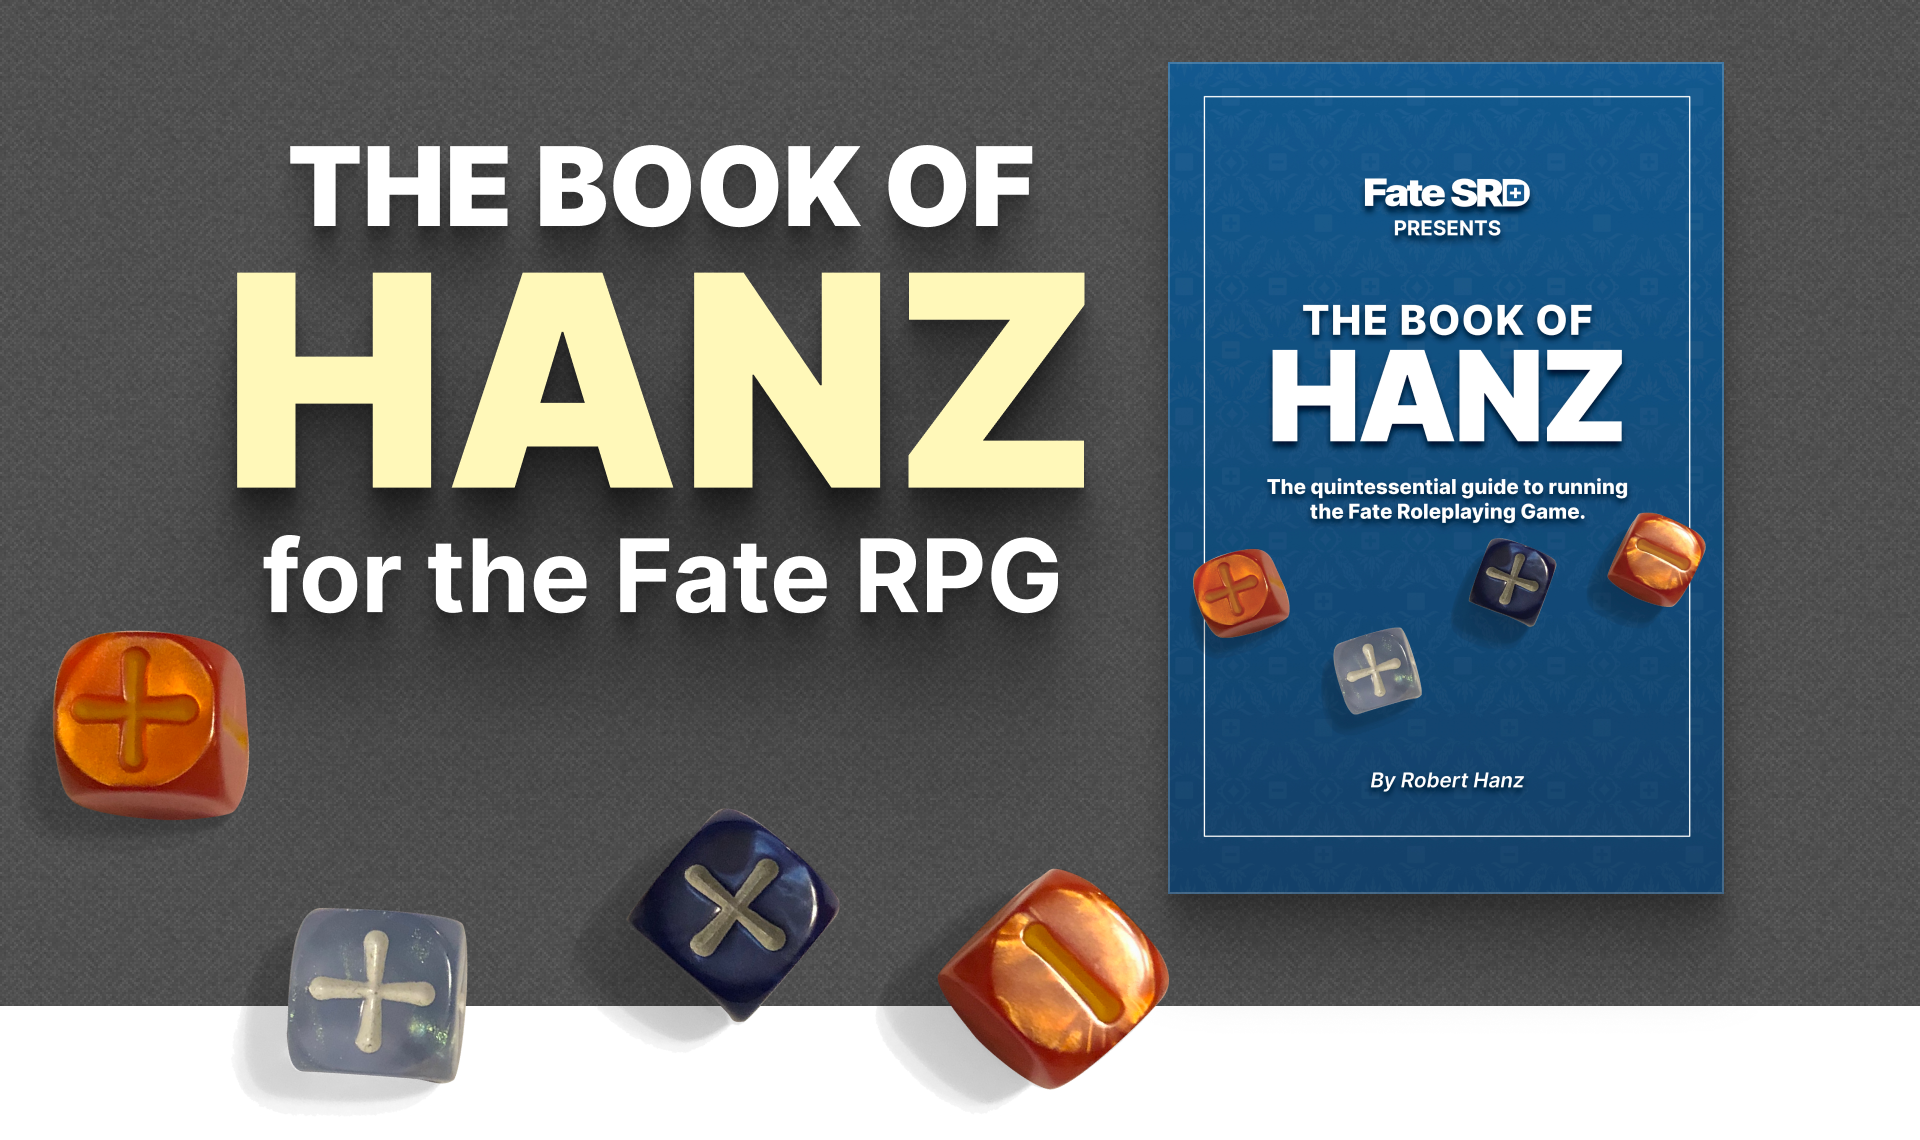 The Book of Hanz